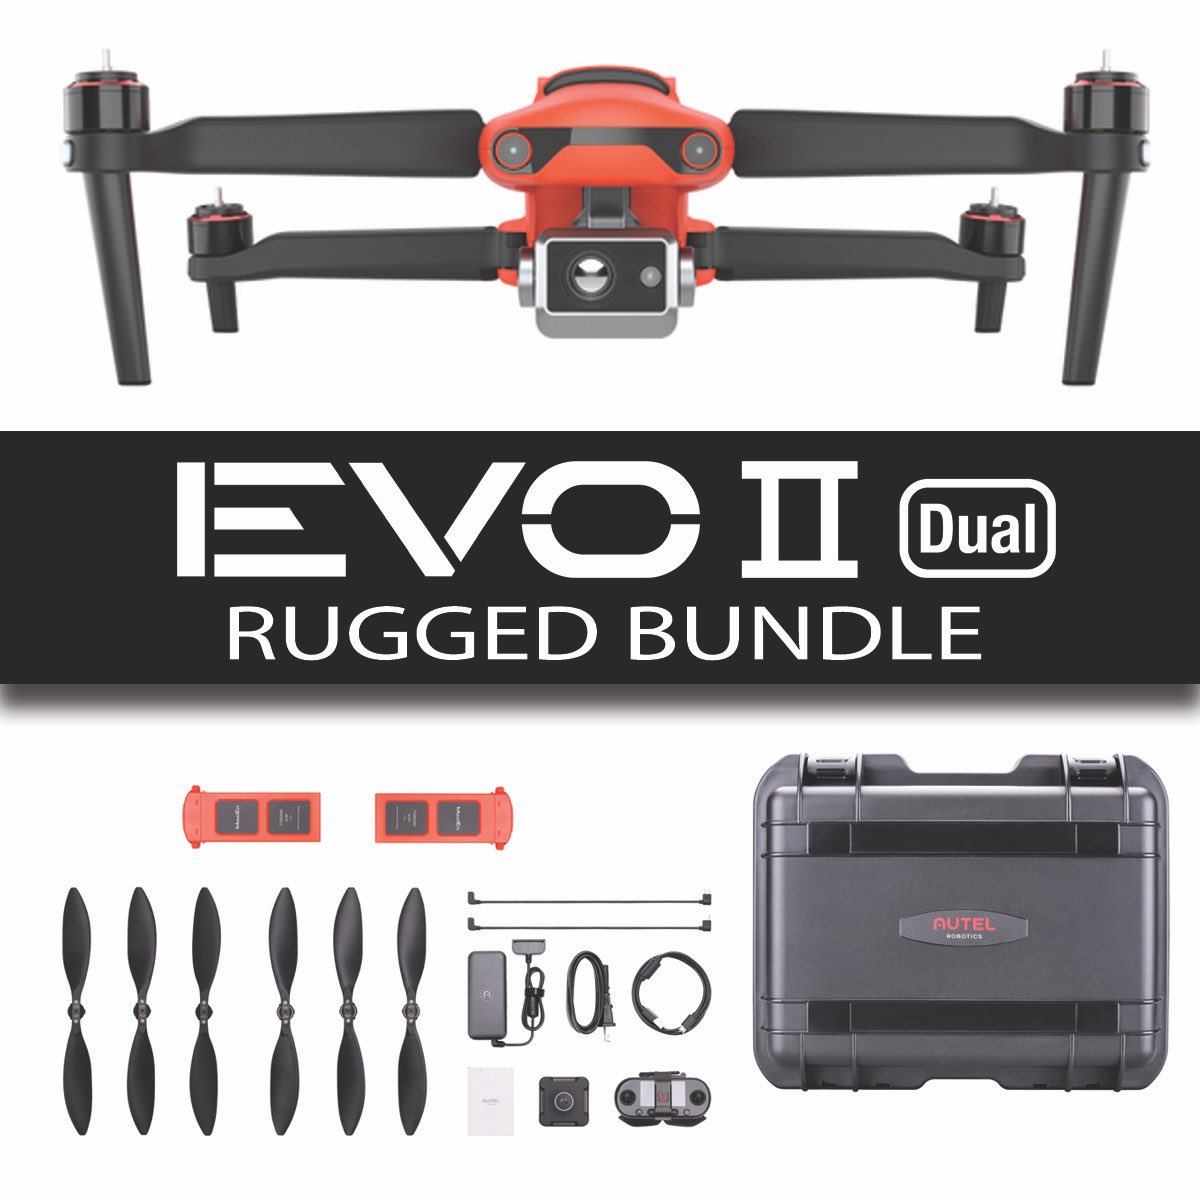 𝐆𝐮𝐞𝐬𝐬 𝐰𝐡𝐚𝐭 𝐭𝐢𝐦𝐞 𝐢𝐭 𝐢𝐬!?
-now accepting preorders-
Call for pricing 856-281-7545

#autelrobotics #evoii #thermal #drone #publicsafety #firstresponders #portable #autelevoii #teamorange